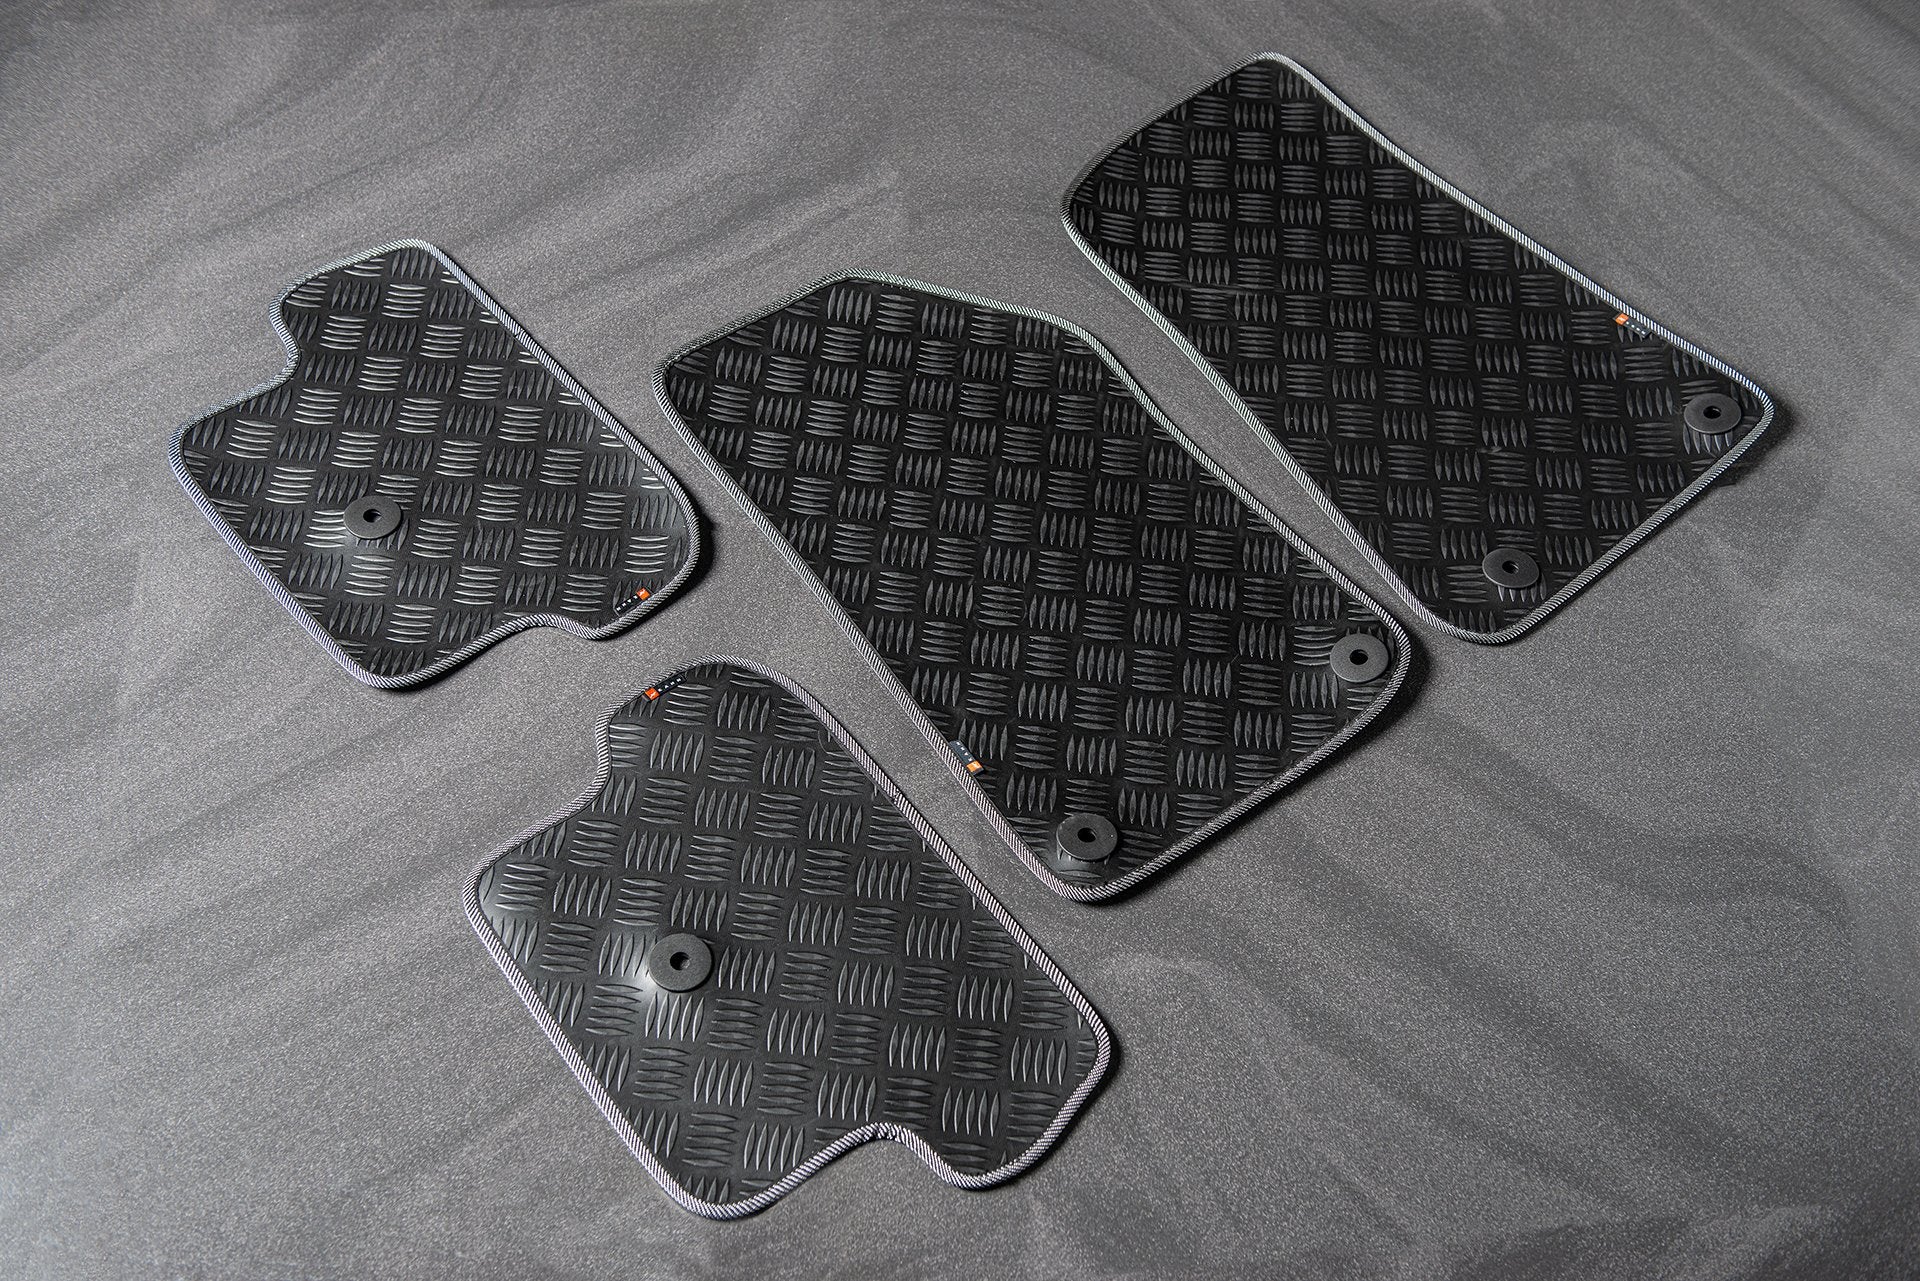 Jeep Wrangler Jl (2018-Present) Chequered Rubber Mats - 2 Door by Chelsea Truck Company - Image 651